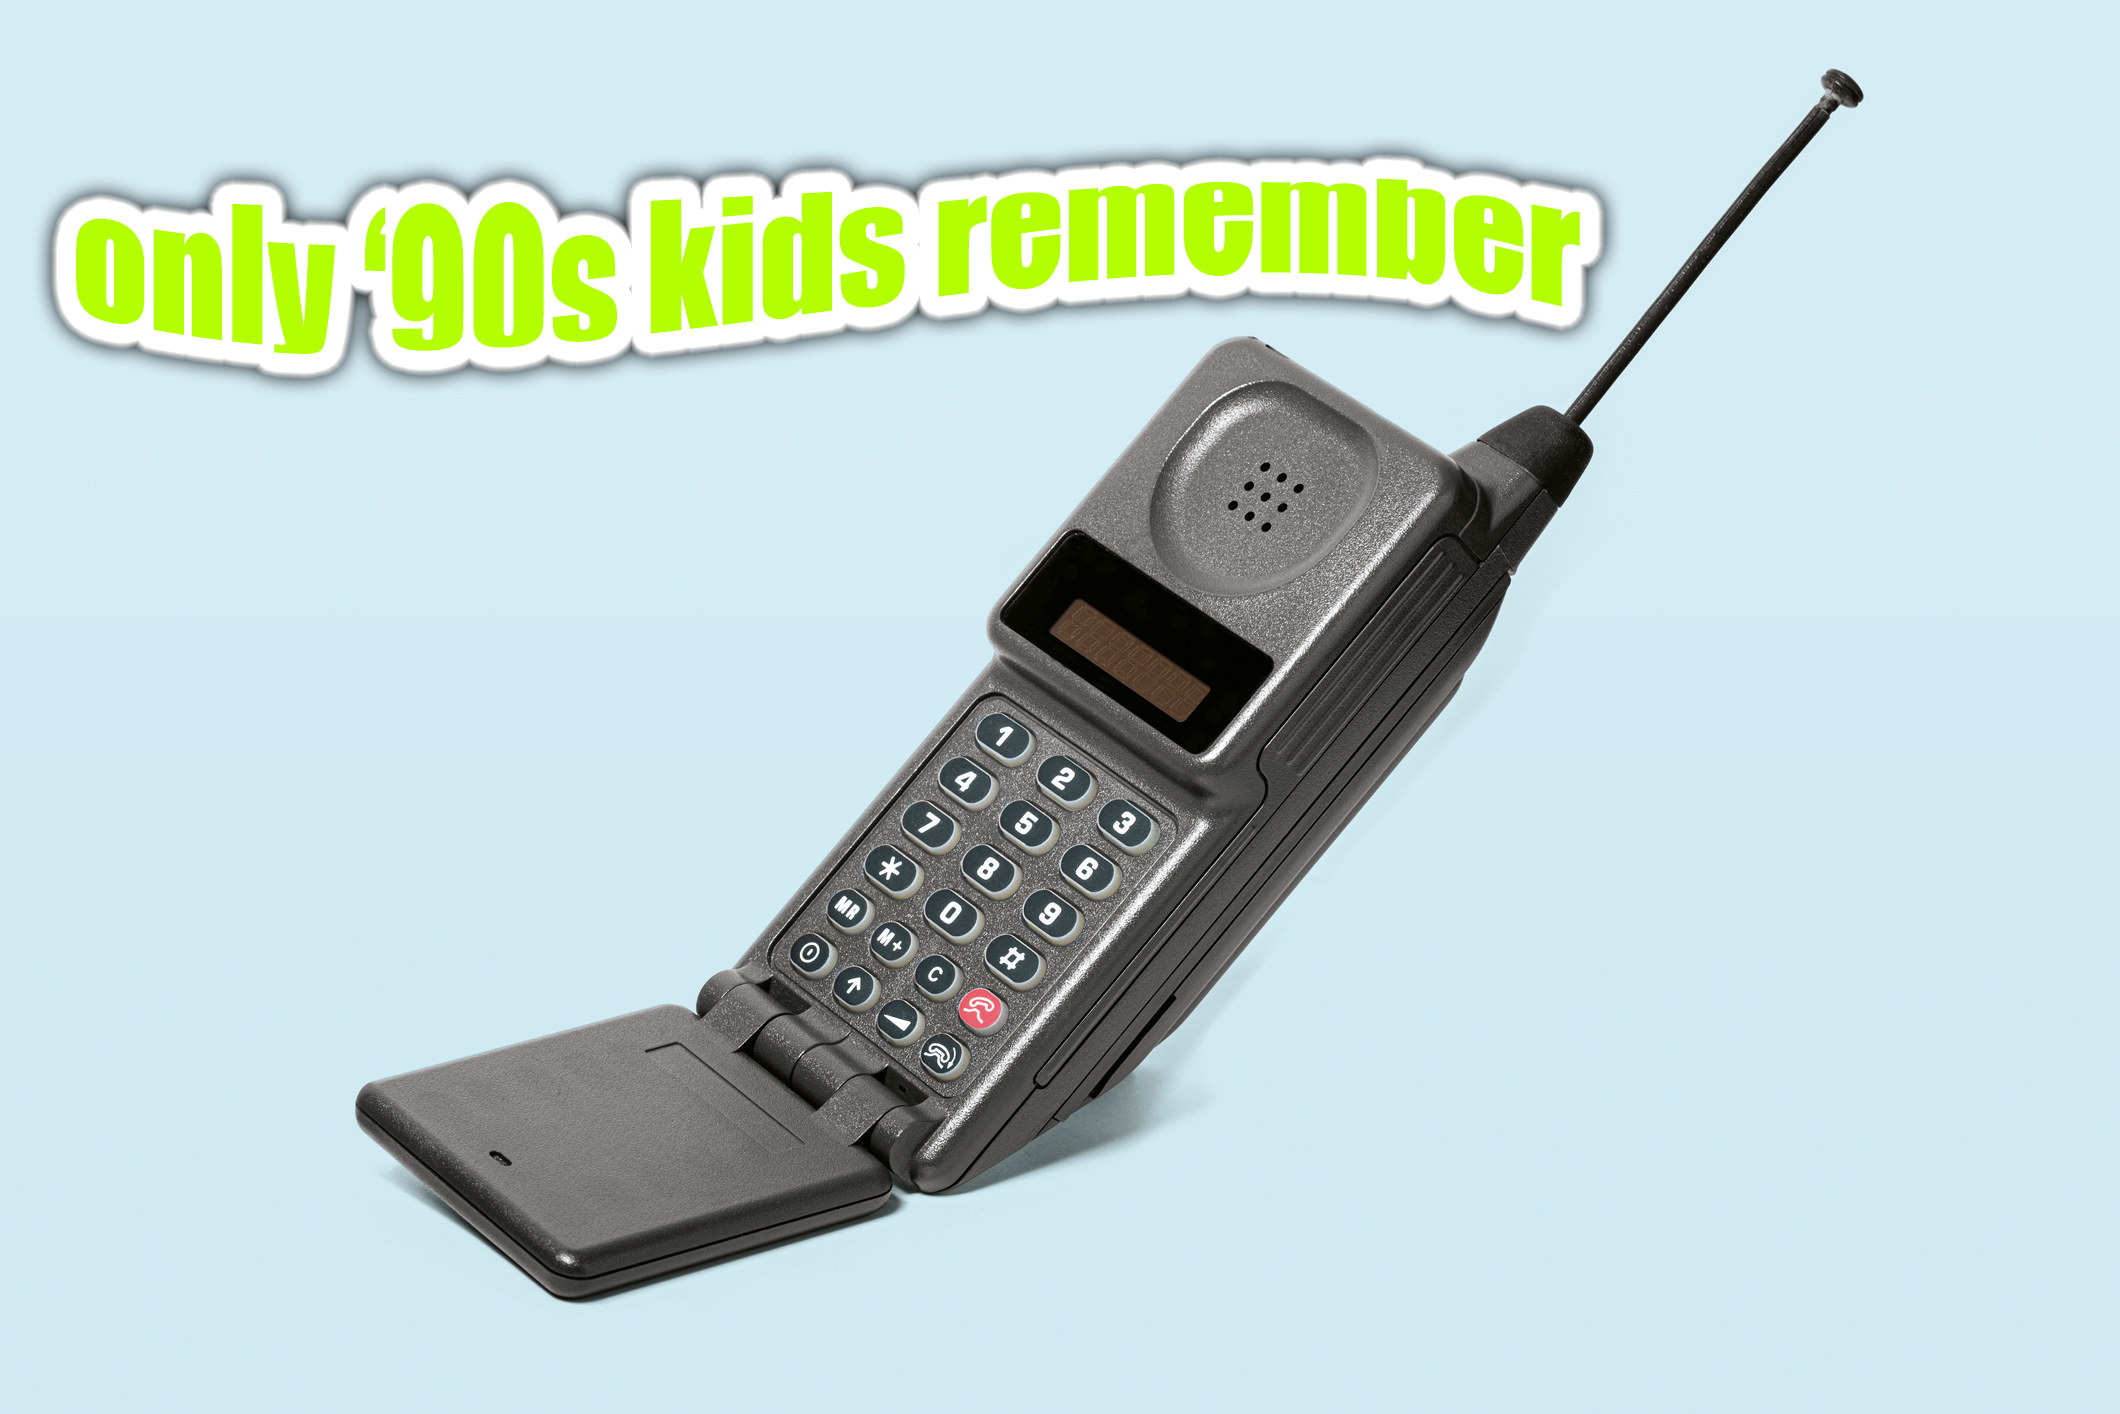 &quot;Only &#x27;90s kids remember&quot; over a flip phone